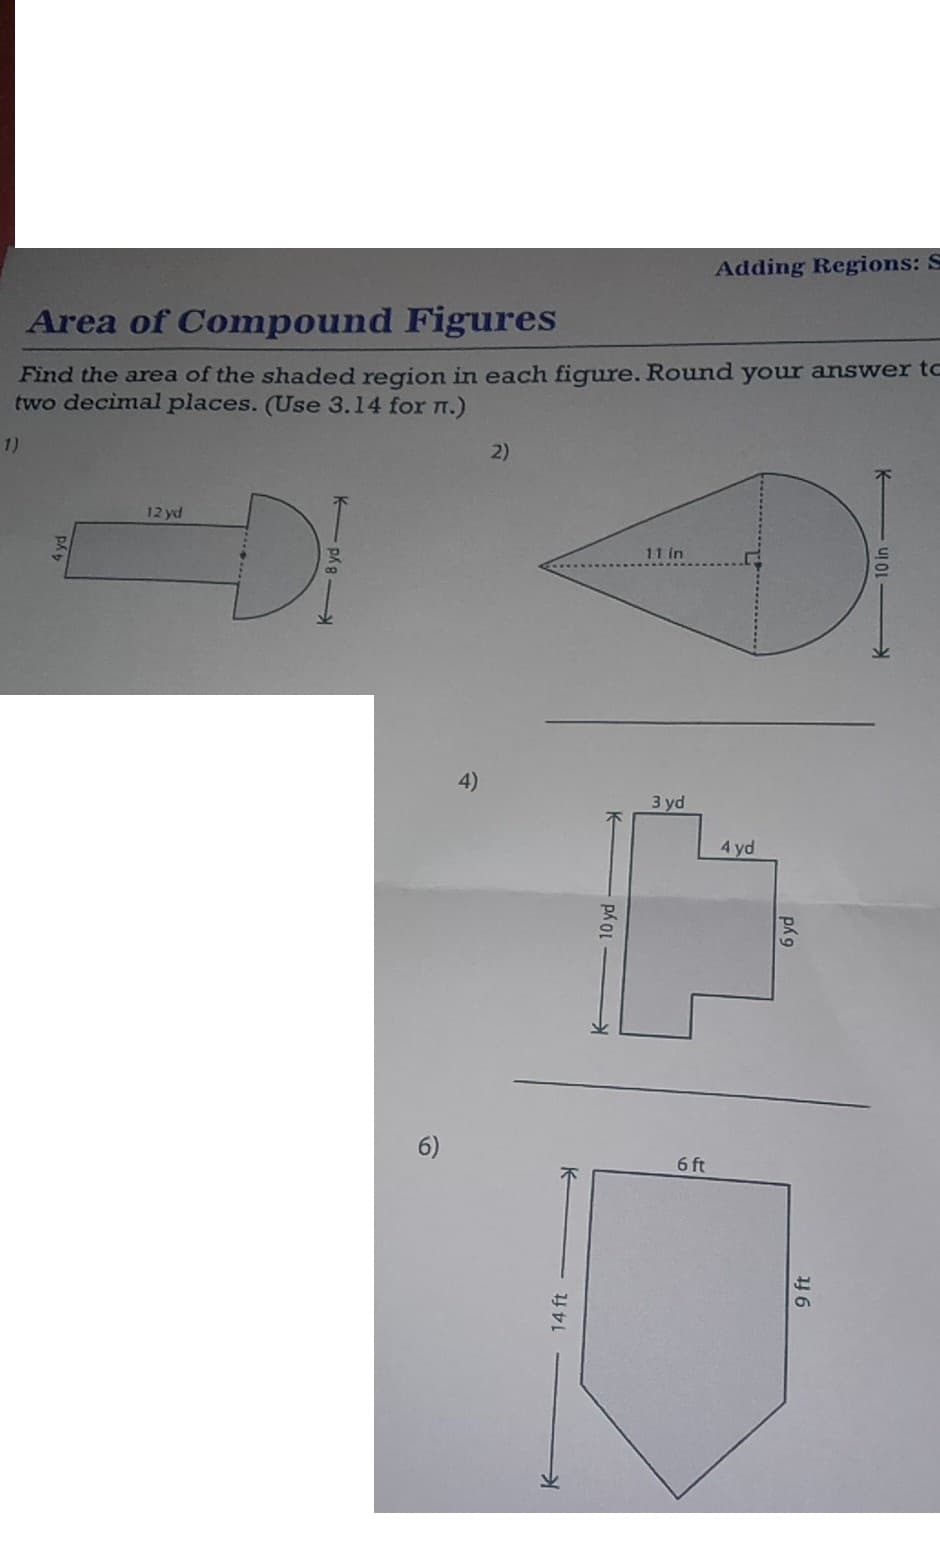 Area of Compound Figures
Find the area of the shaded region in each figure. Round your answer to
two decimal places. (Use 3.14 for n.)
1)
12 yd
DI
6)
4)
2)
14 ft
To ya
11 in
3 yd
Adding Regions: S
6 ft
4 yd
6 yd
9 ft
10 in